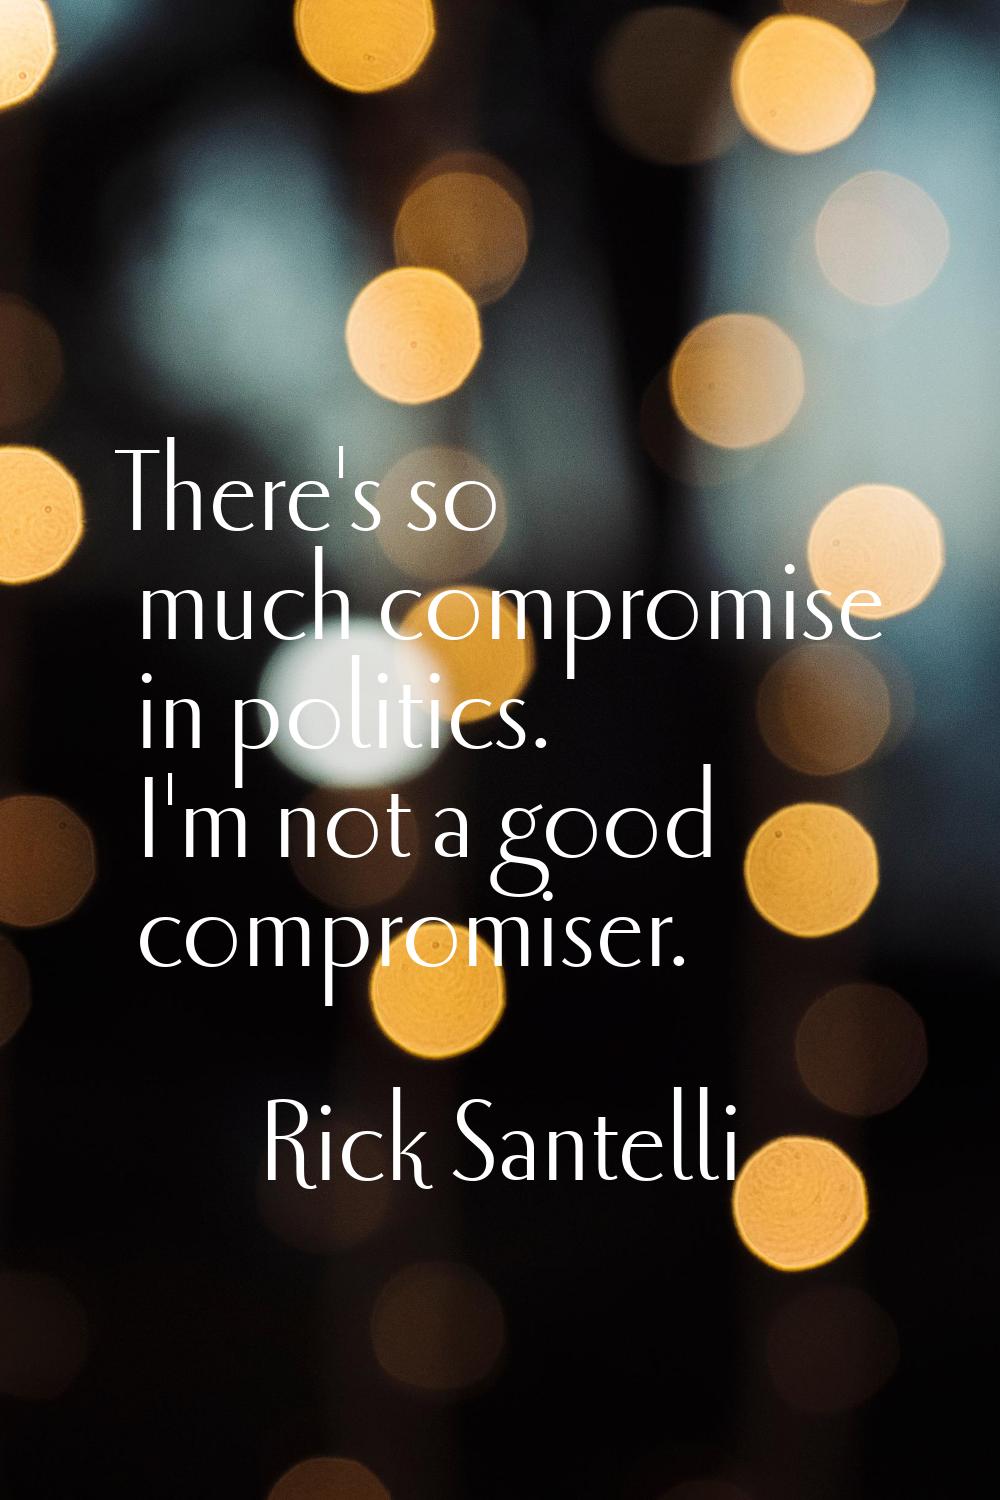 There's so much compromise in politics. I'm not a good compromiser.